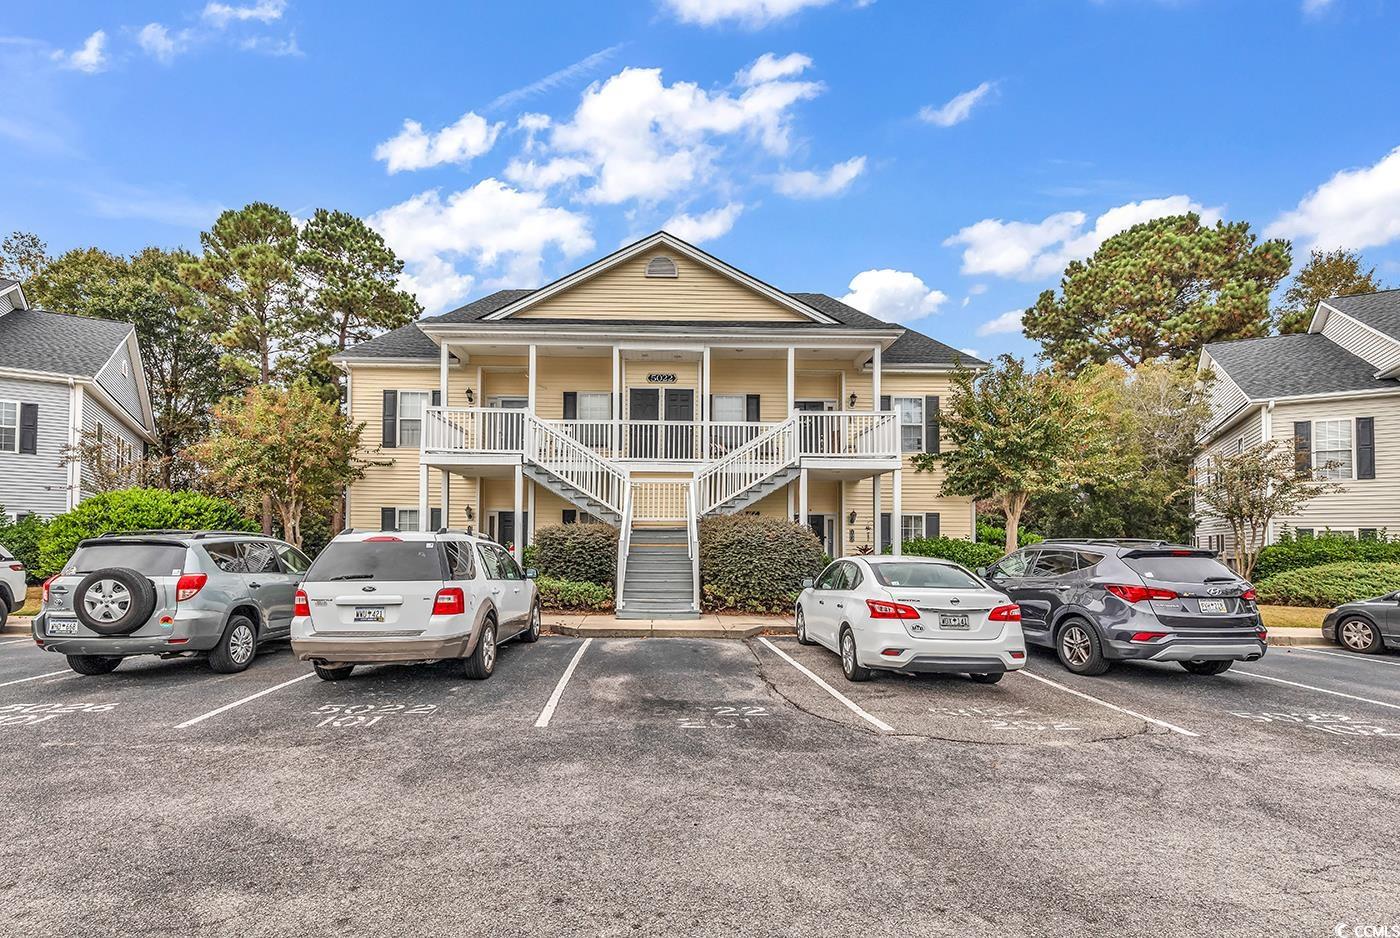 one of the lowest priced 3 bedroom condos in all of carolina forest! this 3br, 2ba condo is located in the gated community at the fountains! this is an end unit and has has all new lvp flooring in 2023, the hvac was replaced in 2019, and the water heater was replaced in 2022. this unit offers 1240 heated sqft and also has a screened in porch with privacy. the open kitchen has ample counter & cabinet space, room for barstools, and a dining space just close by. the master suite has room for a king size bed, a private bathroom, and walk in closet. the two guest bedrooms are great size and share a bathroom. the fountains is a gated community, has a community pool, and offers assigned parking spaces!